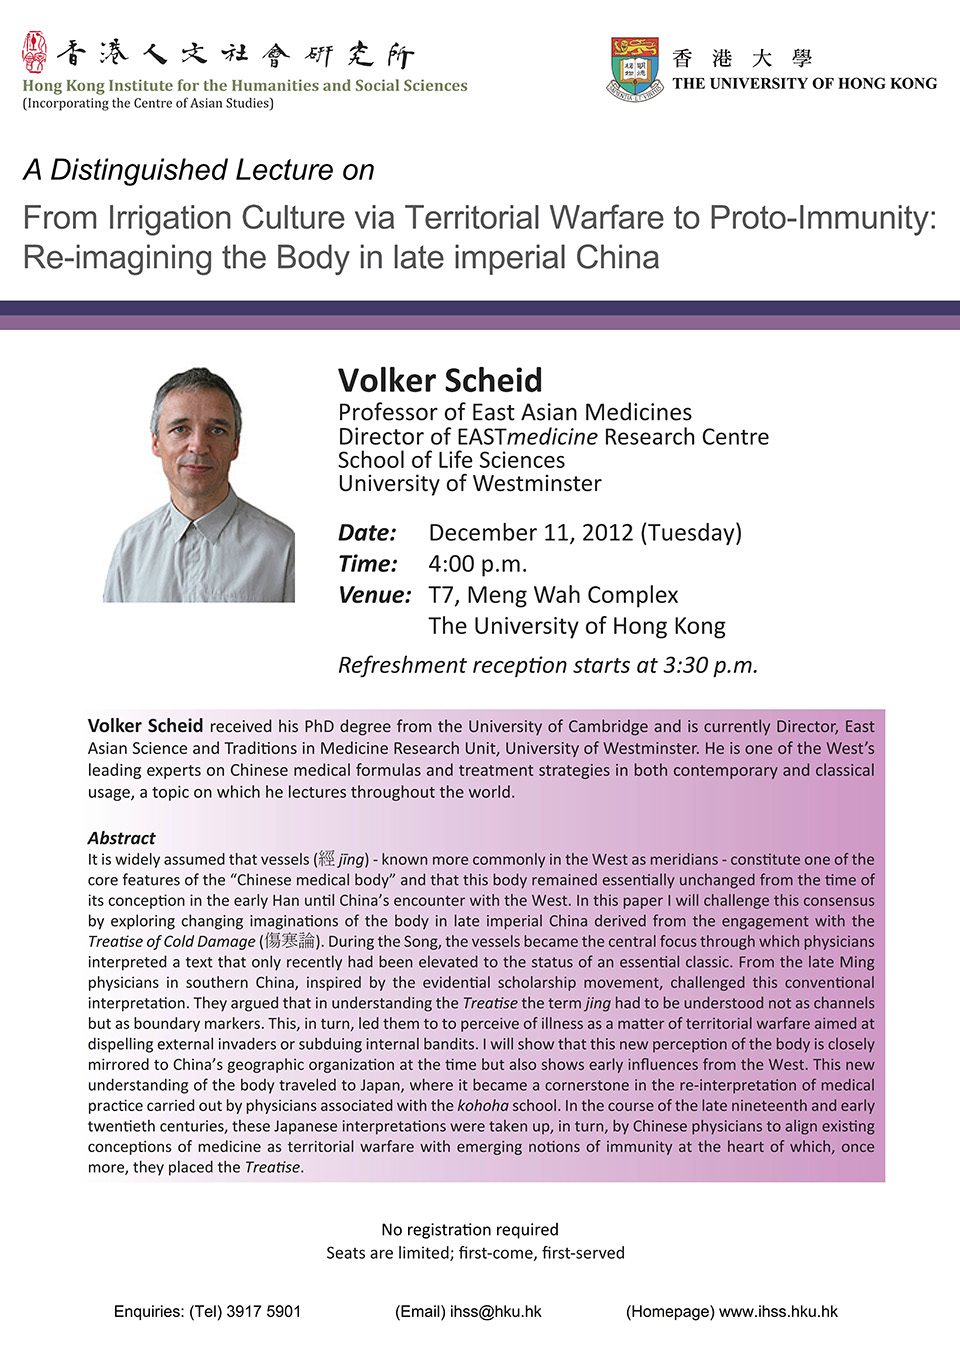 Distinguished Lecture on “From Irrigation Culture via Territorial Warfare to Proto-Immunity: Re-imagining the Body in late imperial China” by Professor Volker Scheid (December 11, 2012)